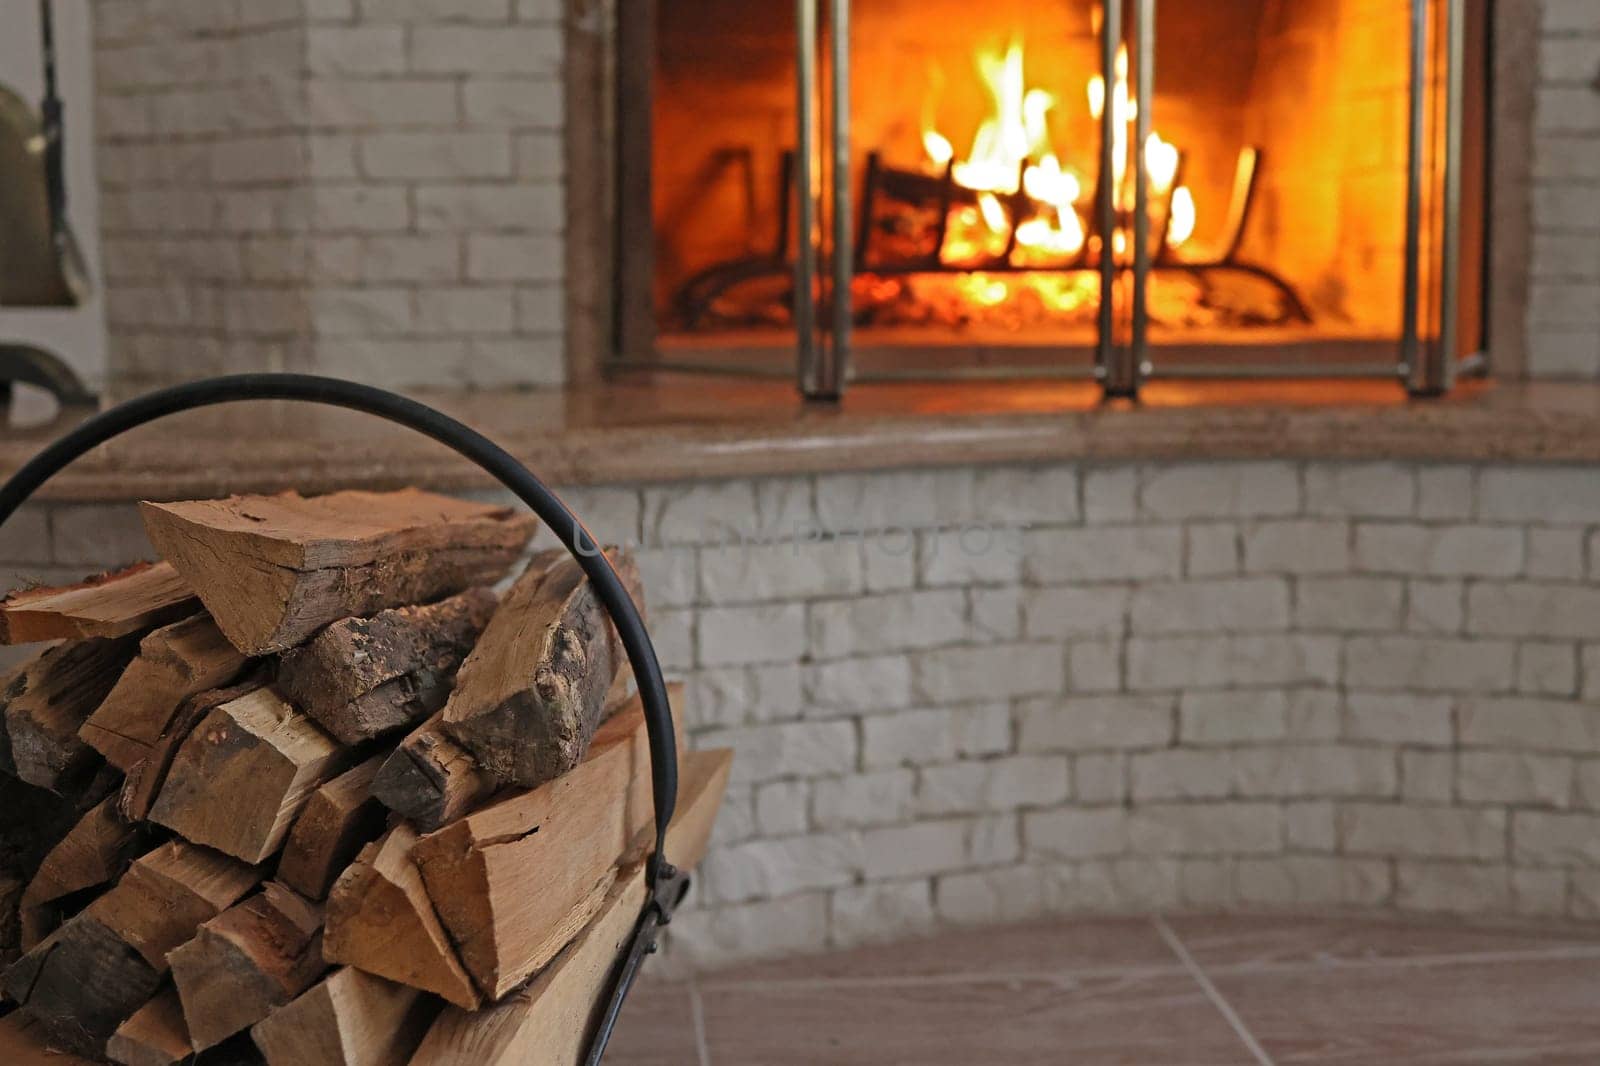 heating the house with wood using a fireplace. firewood is stacked in front of a burning fireplace.